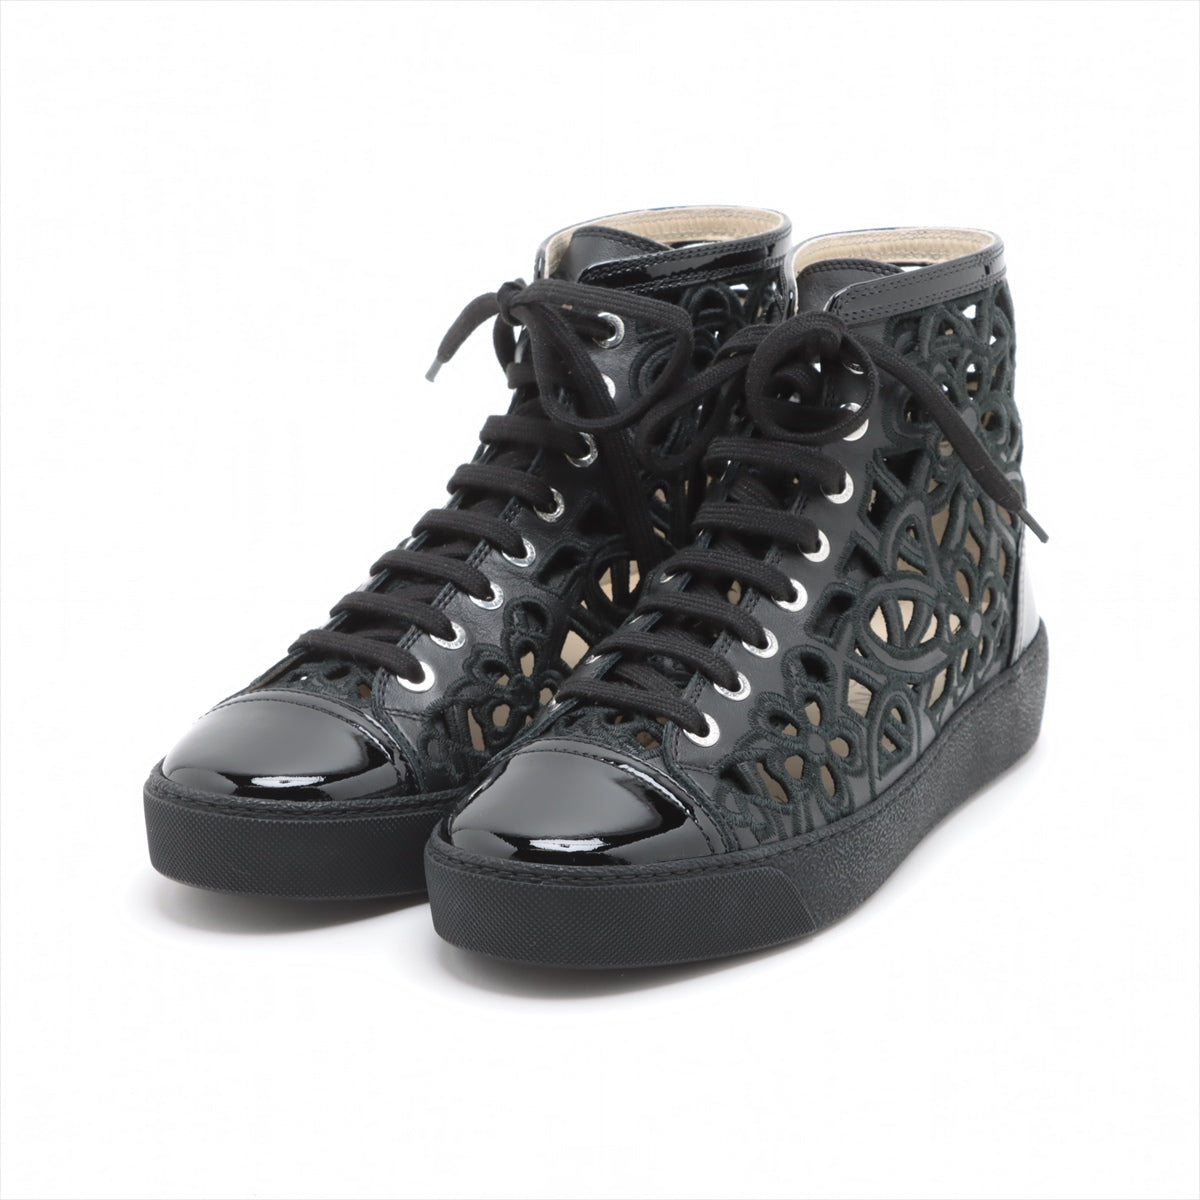 Chanel Coco Mark Leather x fabric High-top Sneakers 38 Ladies' Black floral lace box There is a bag